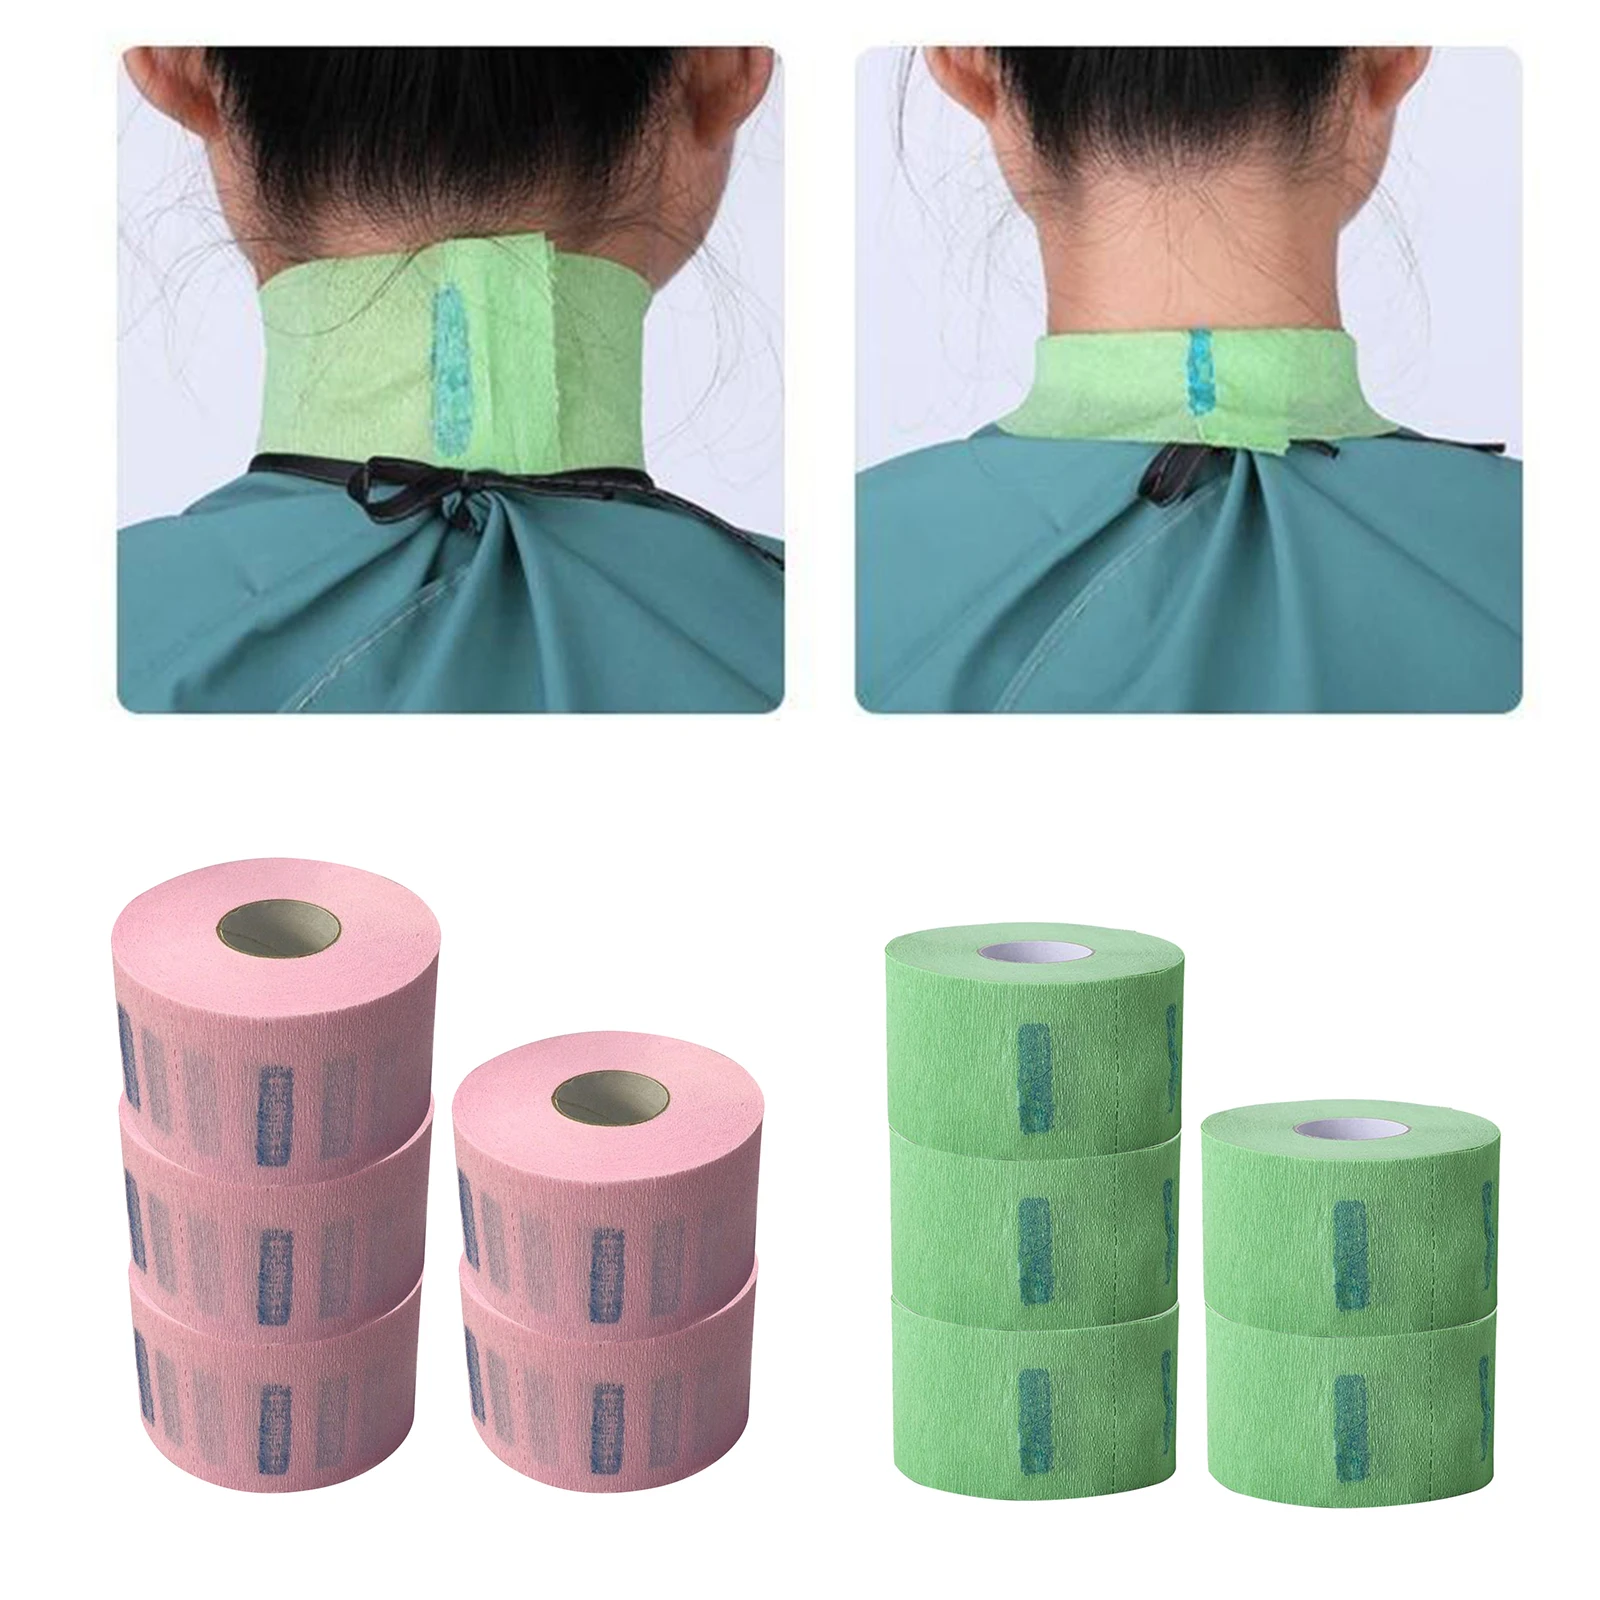 500pcs Stretchy Disposable Neck Paper Strips Barber Salon Hairdressing